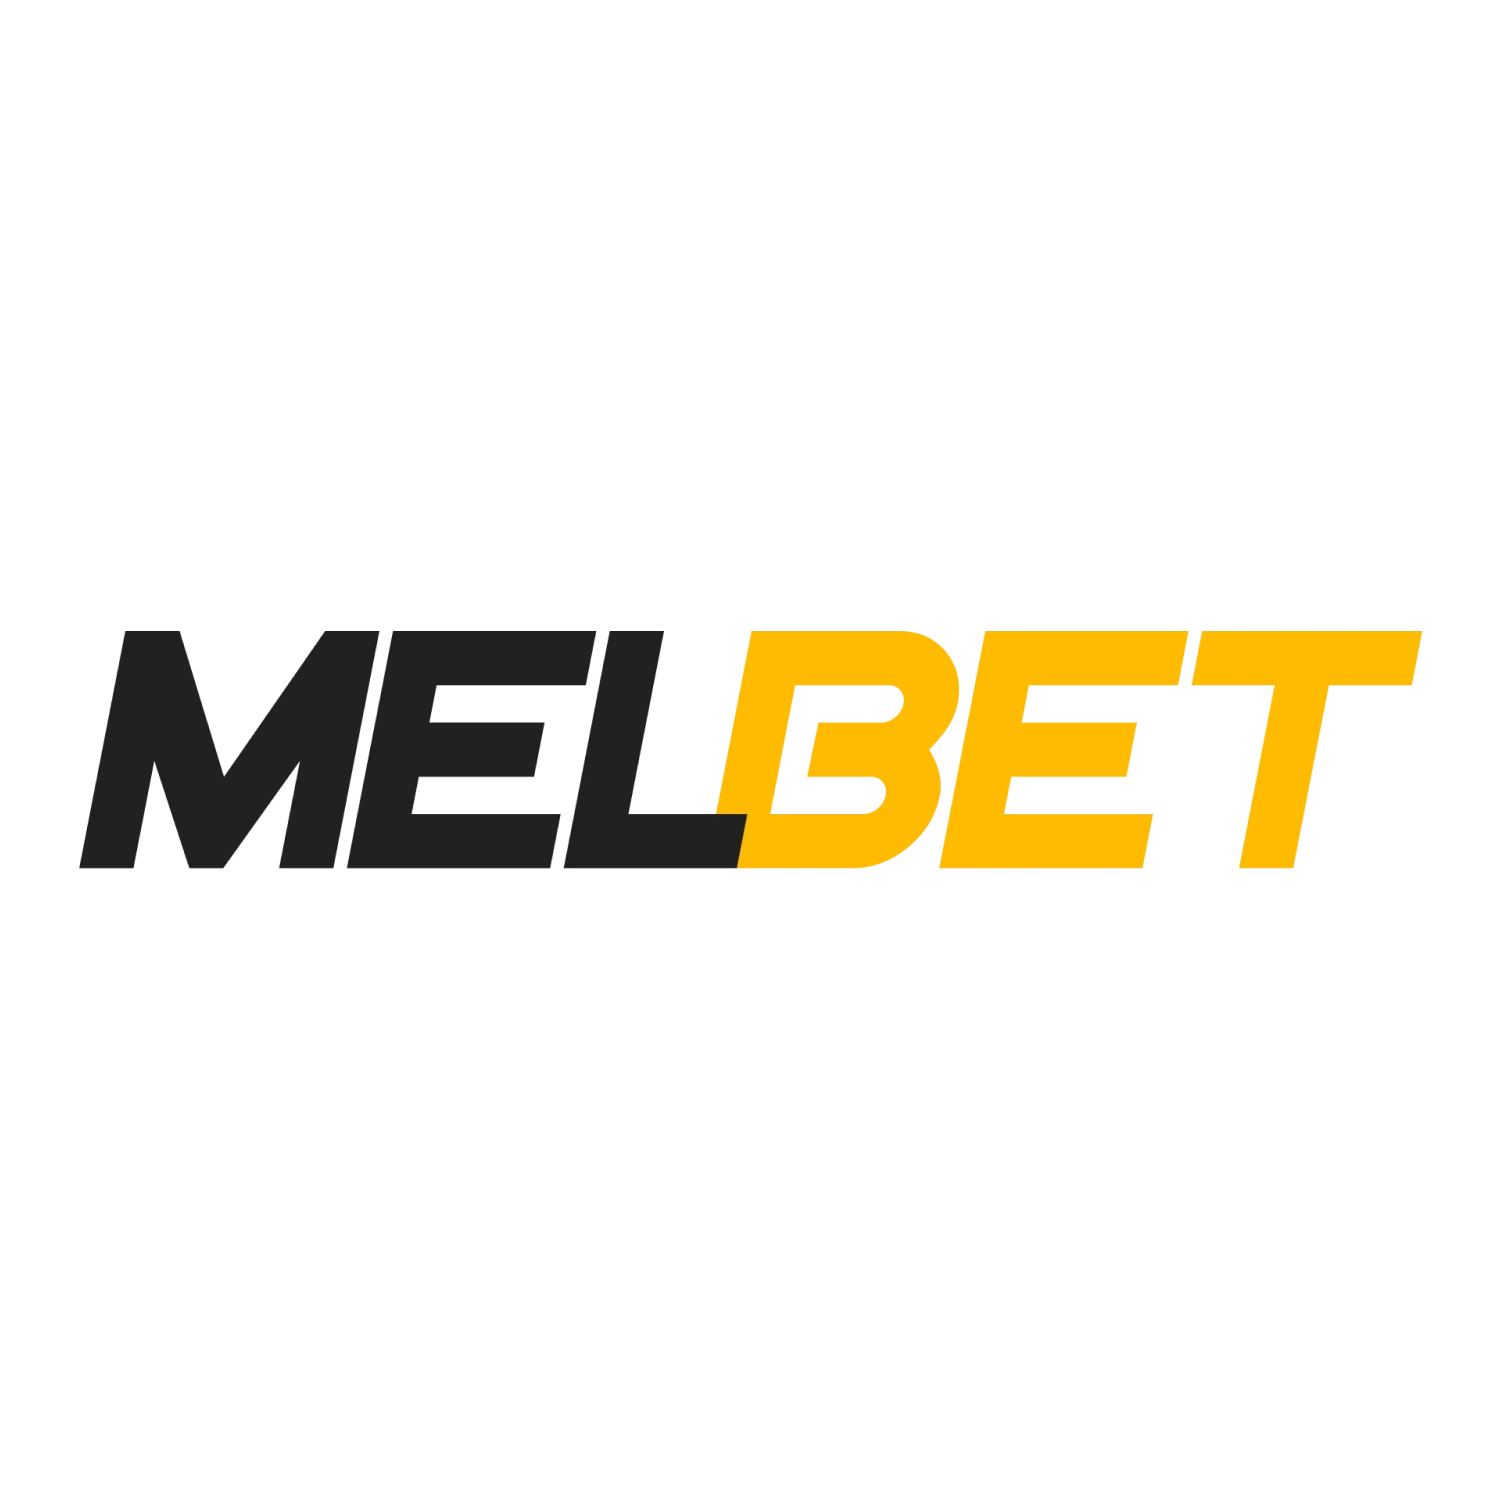 Go to Melbet and place your winning bet.